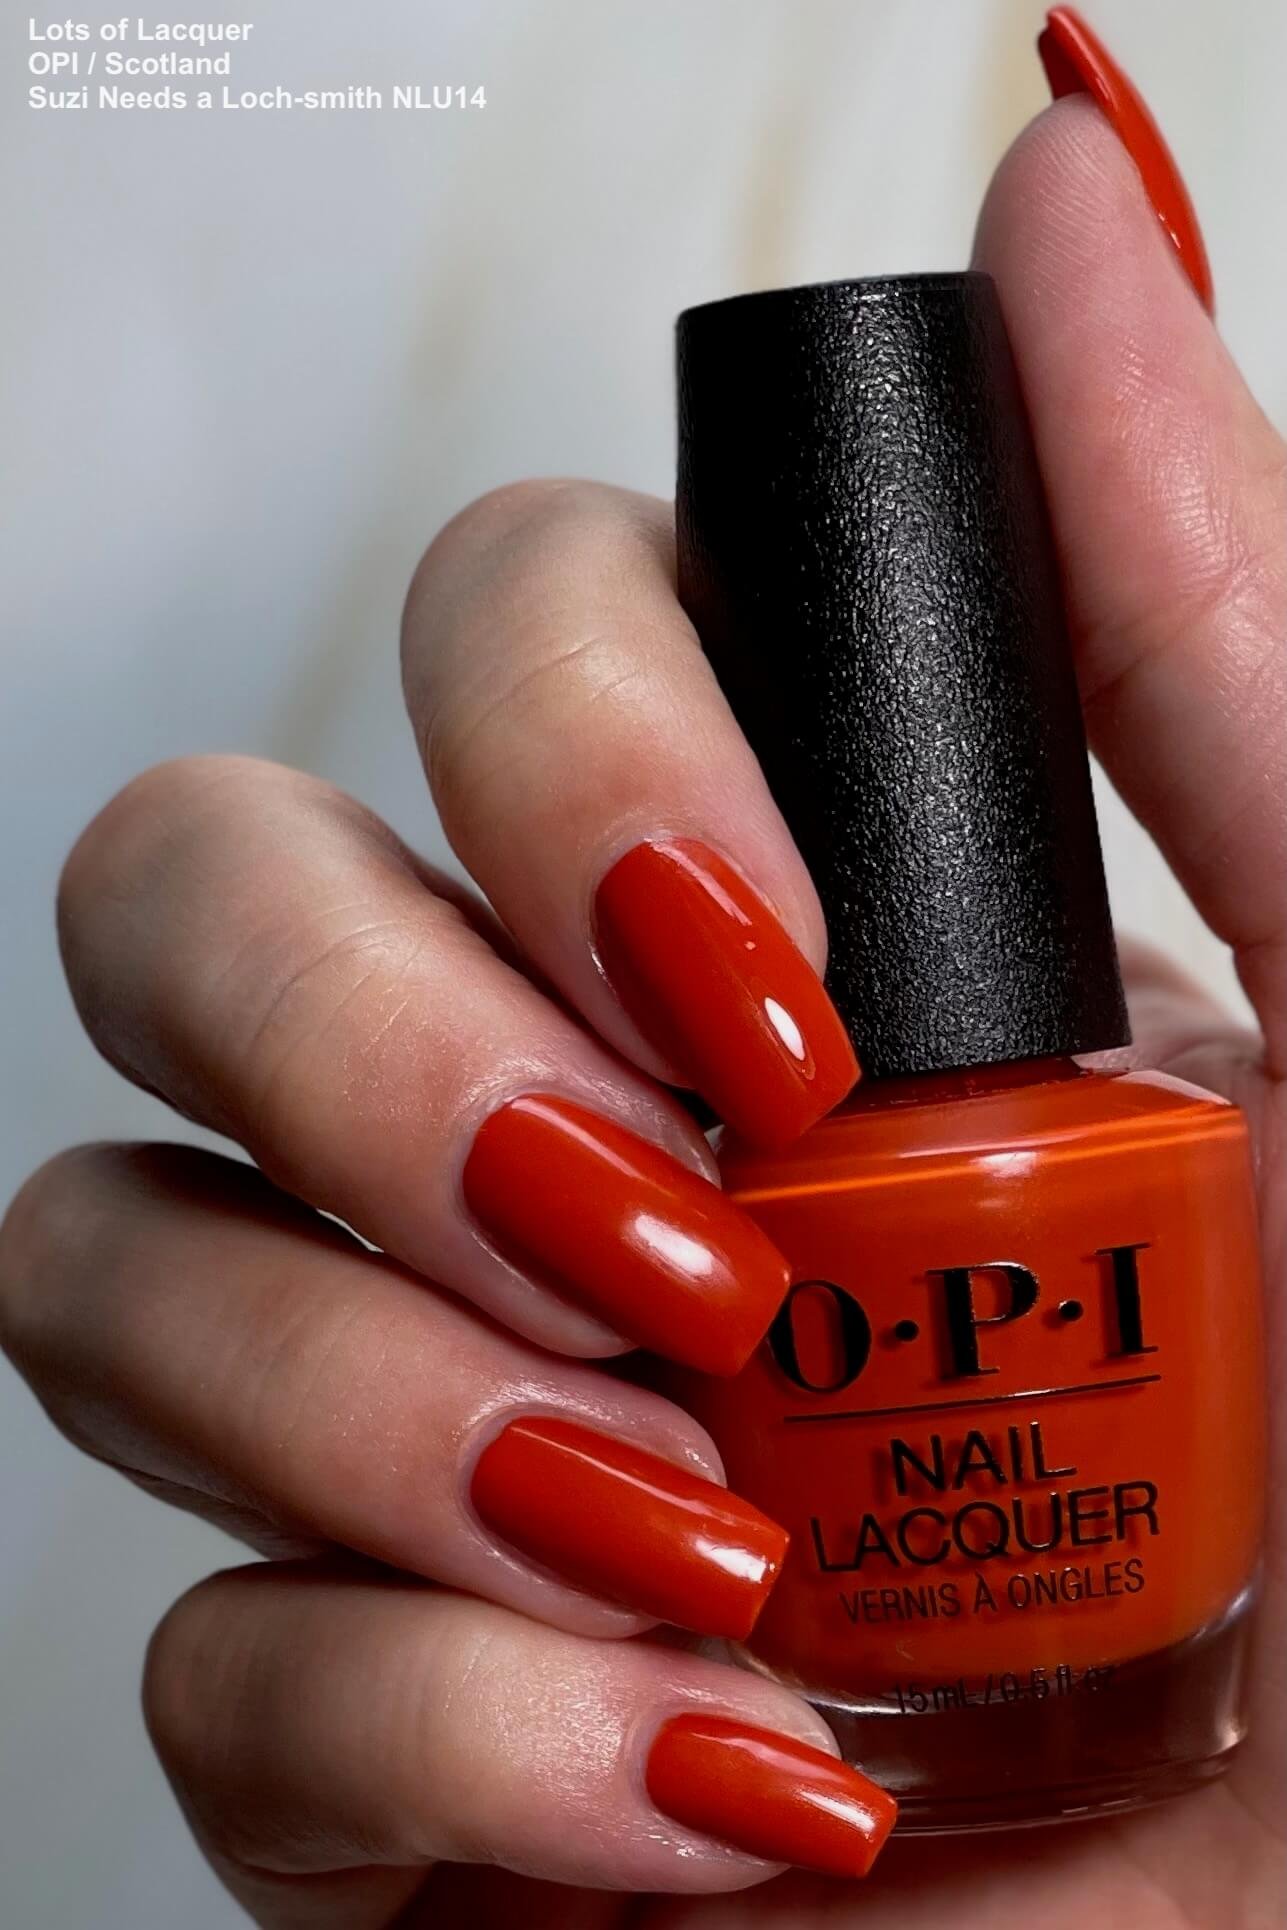 NOTD: OPI Juice bar hopping from Neon collection / Polished Polyglot